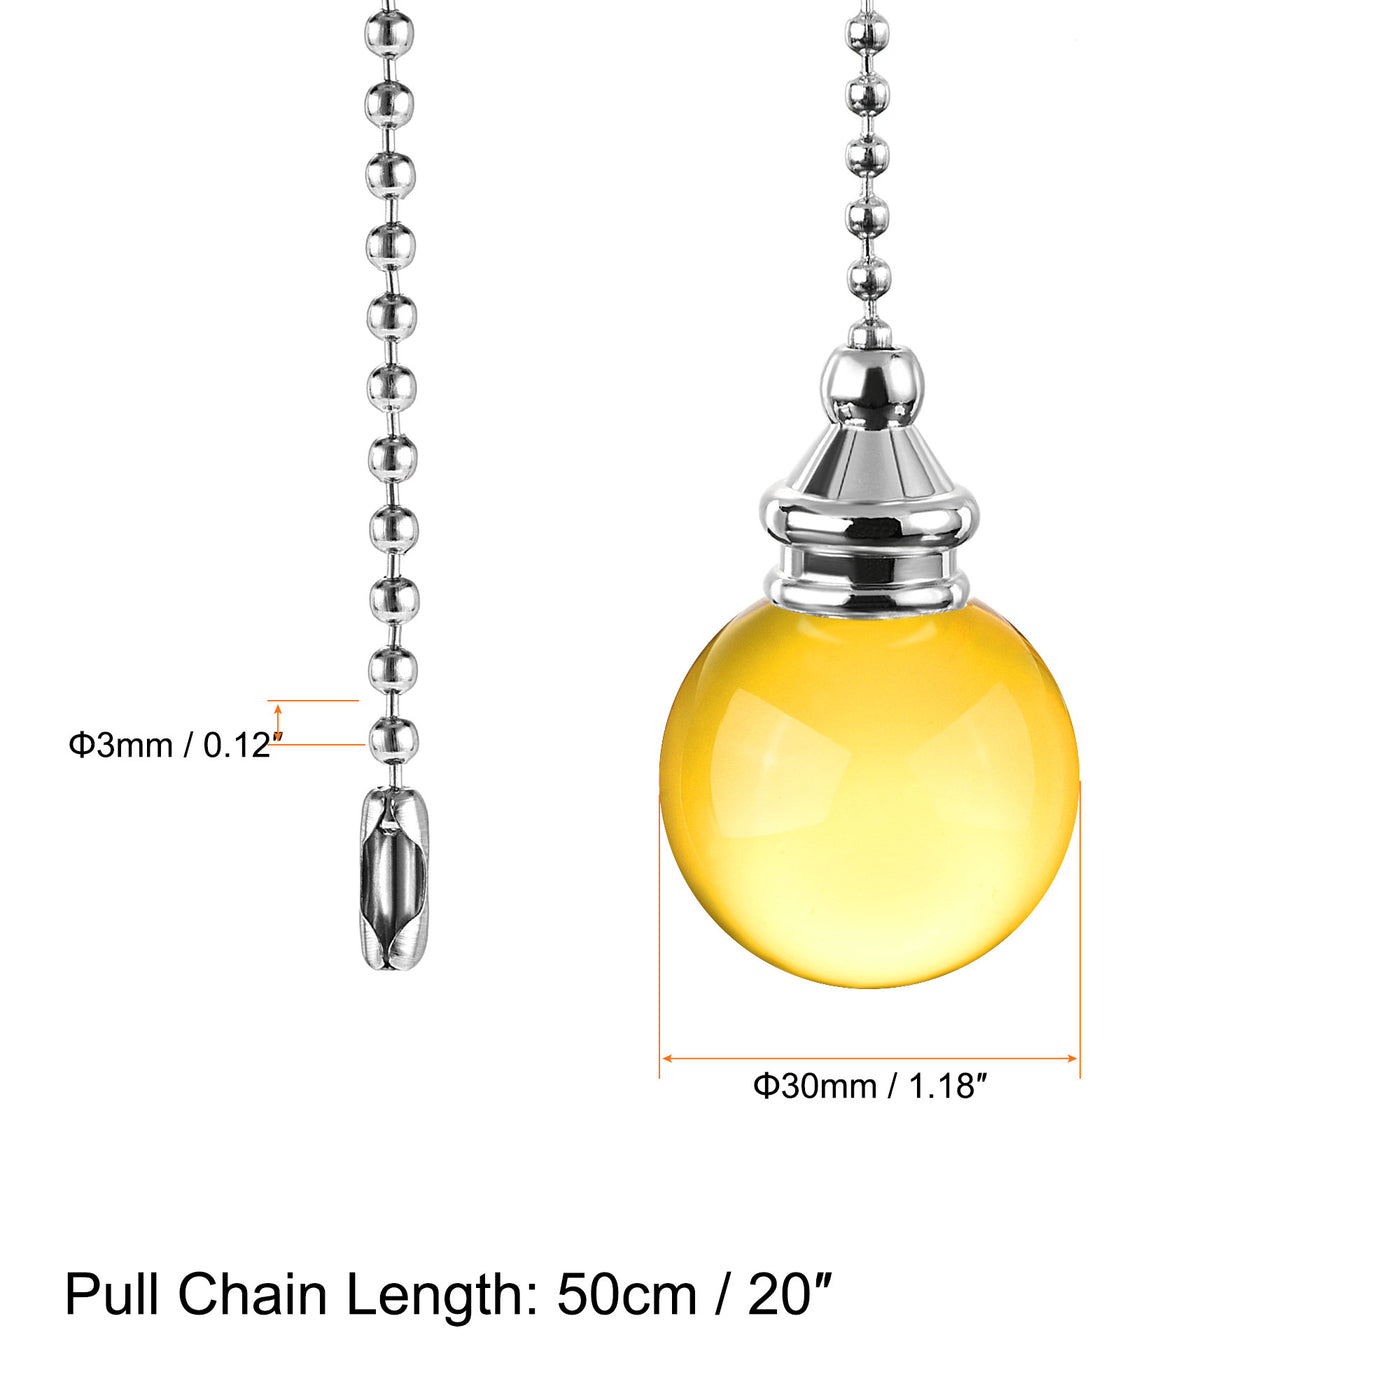 uxcell Uxcell Ceiling Fan Pull Chain, 20 Inch Fan Pull Chain Ornament Extension Lighting Accessories, 30mm Crystal Ball Pendant, Golden Tone